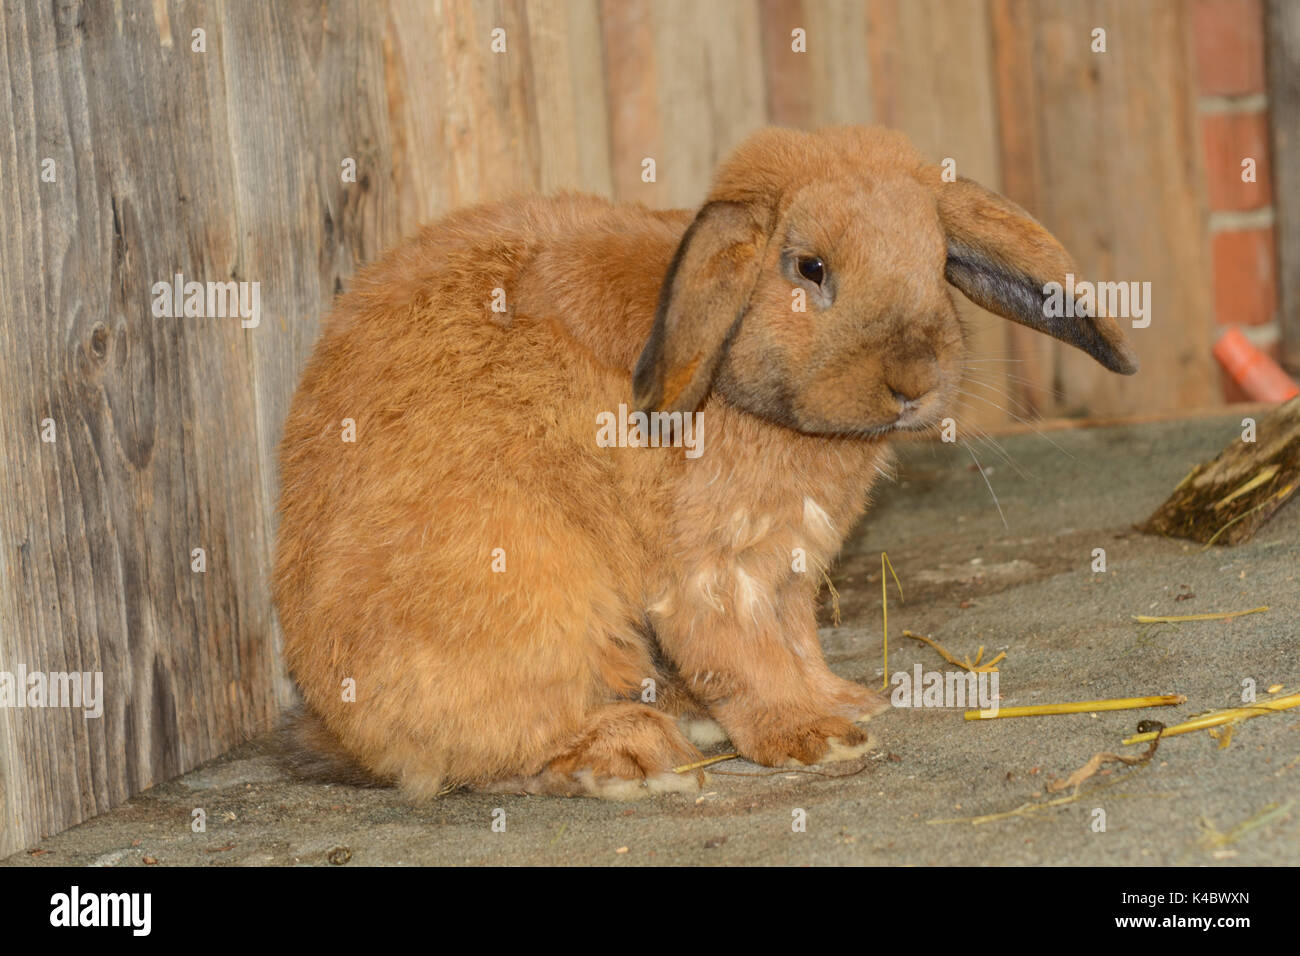 Brown Rabbit With Broom Ears In A Barn Of A Farm Stock Photo